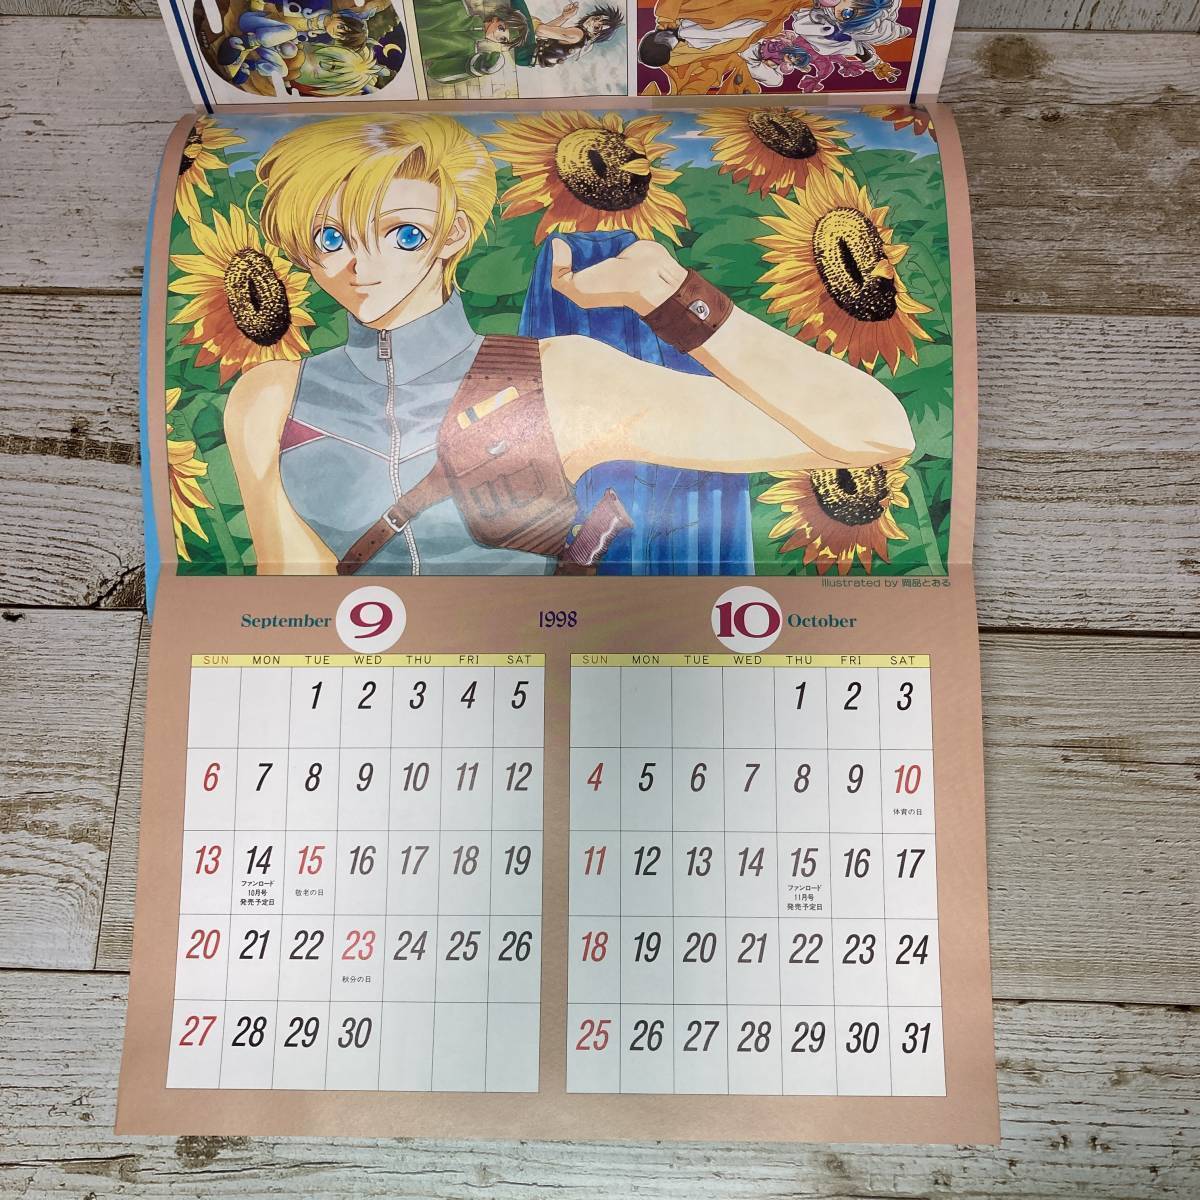 SA03-103 # Fanroad (Fanroad) 1998 year 9 month number # Fuukami Engi # separate volume appendix none pin nap calendar equipped * Junk [ including in a package un- possible ]